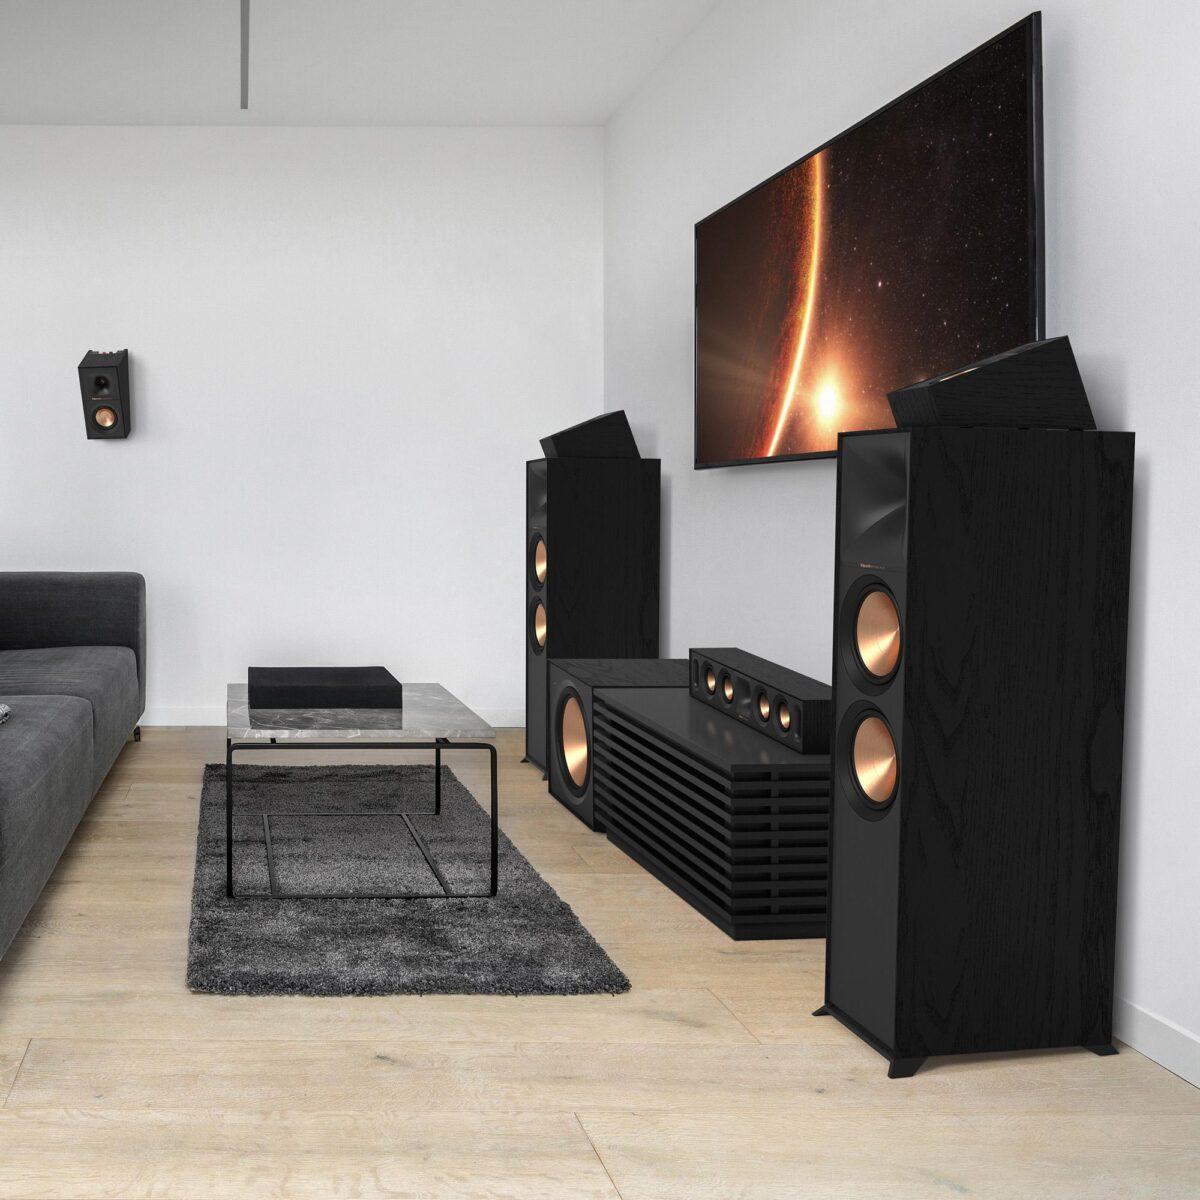 klipsch speakers are great for your home entertainment system